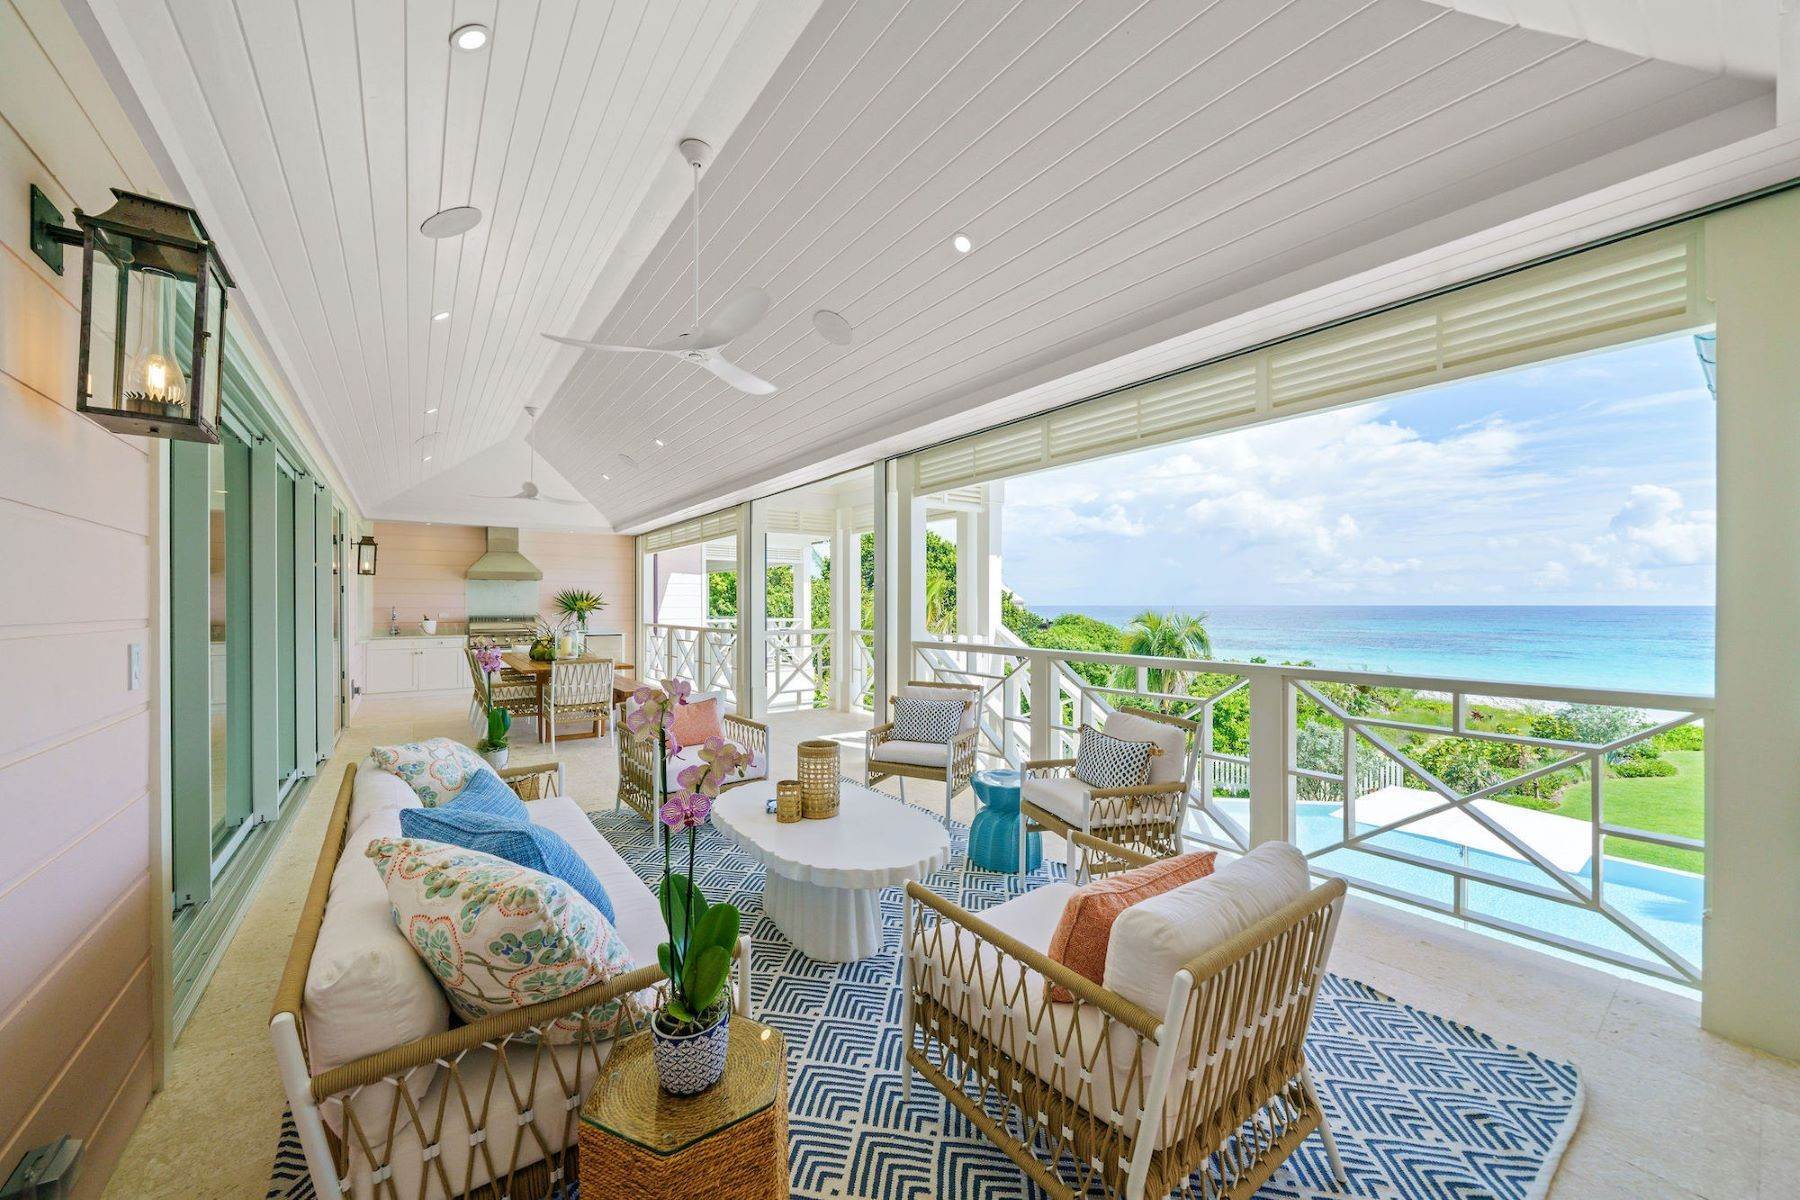 27. Vacation Rentals at Tickled Pink, Harbour Island Rental Harbour Island, Eleuthera, Bahamas